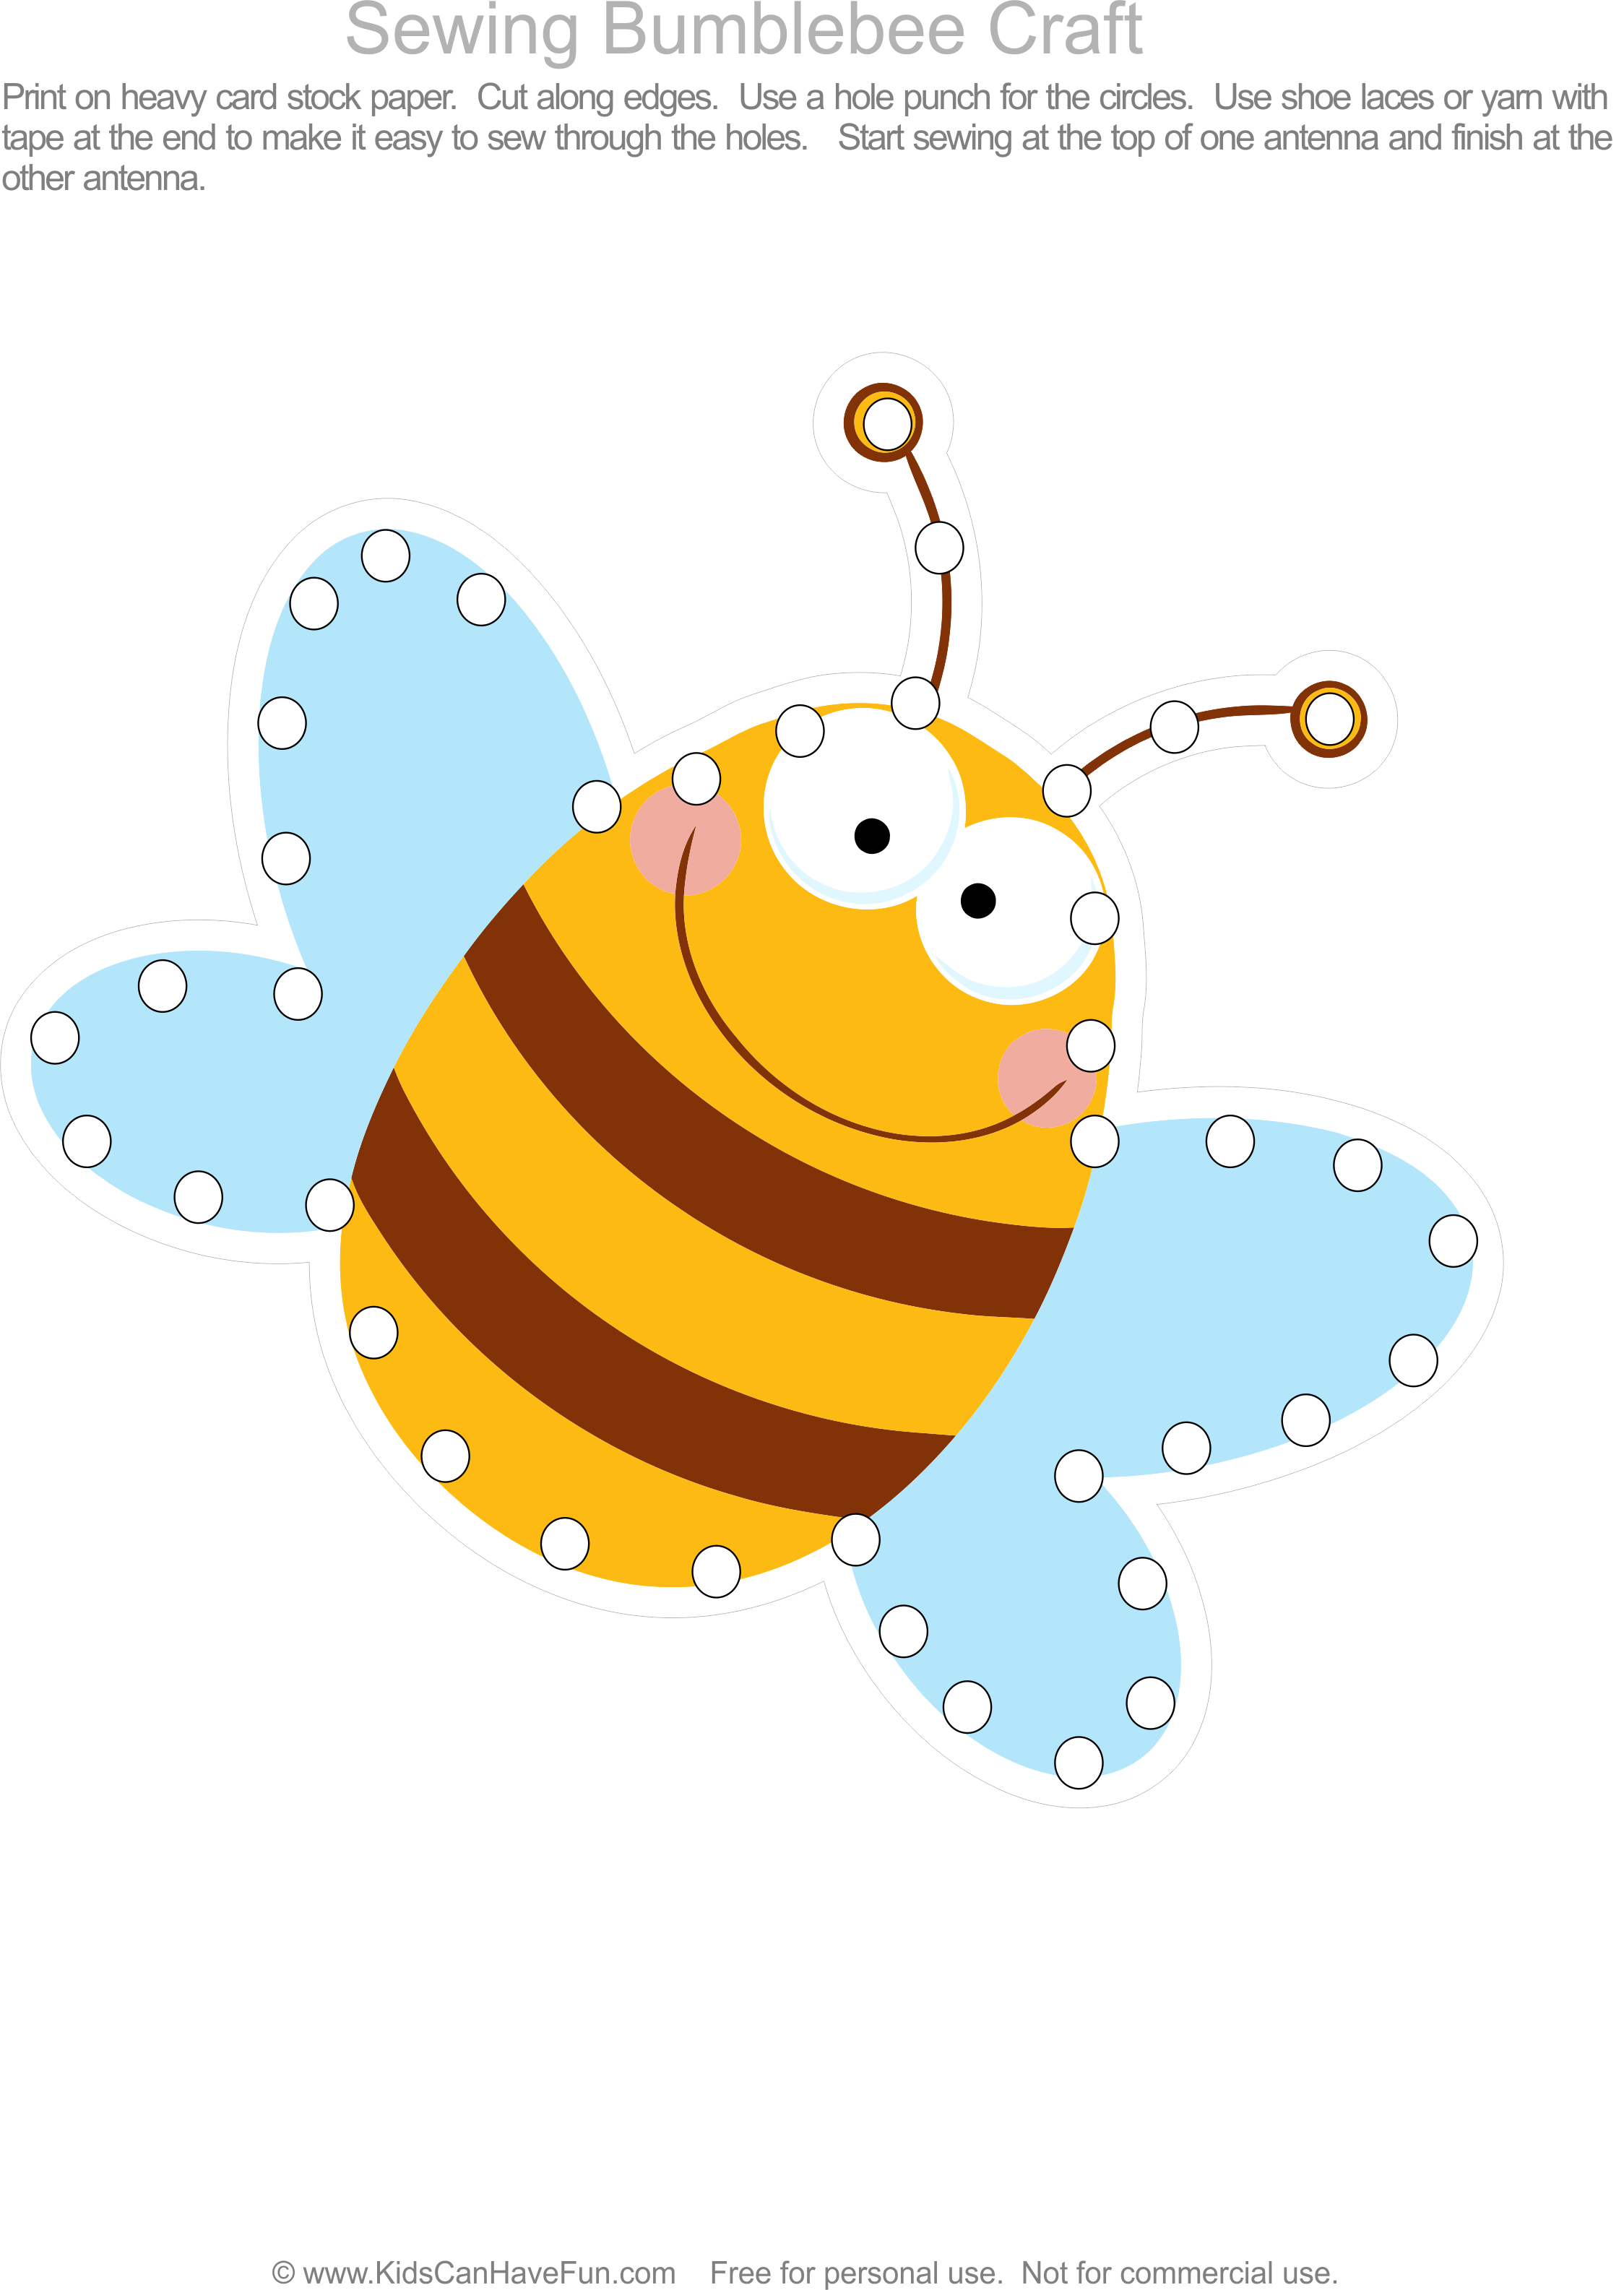 Bumblebee craft summer activities. Sewing clipart sewing bee